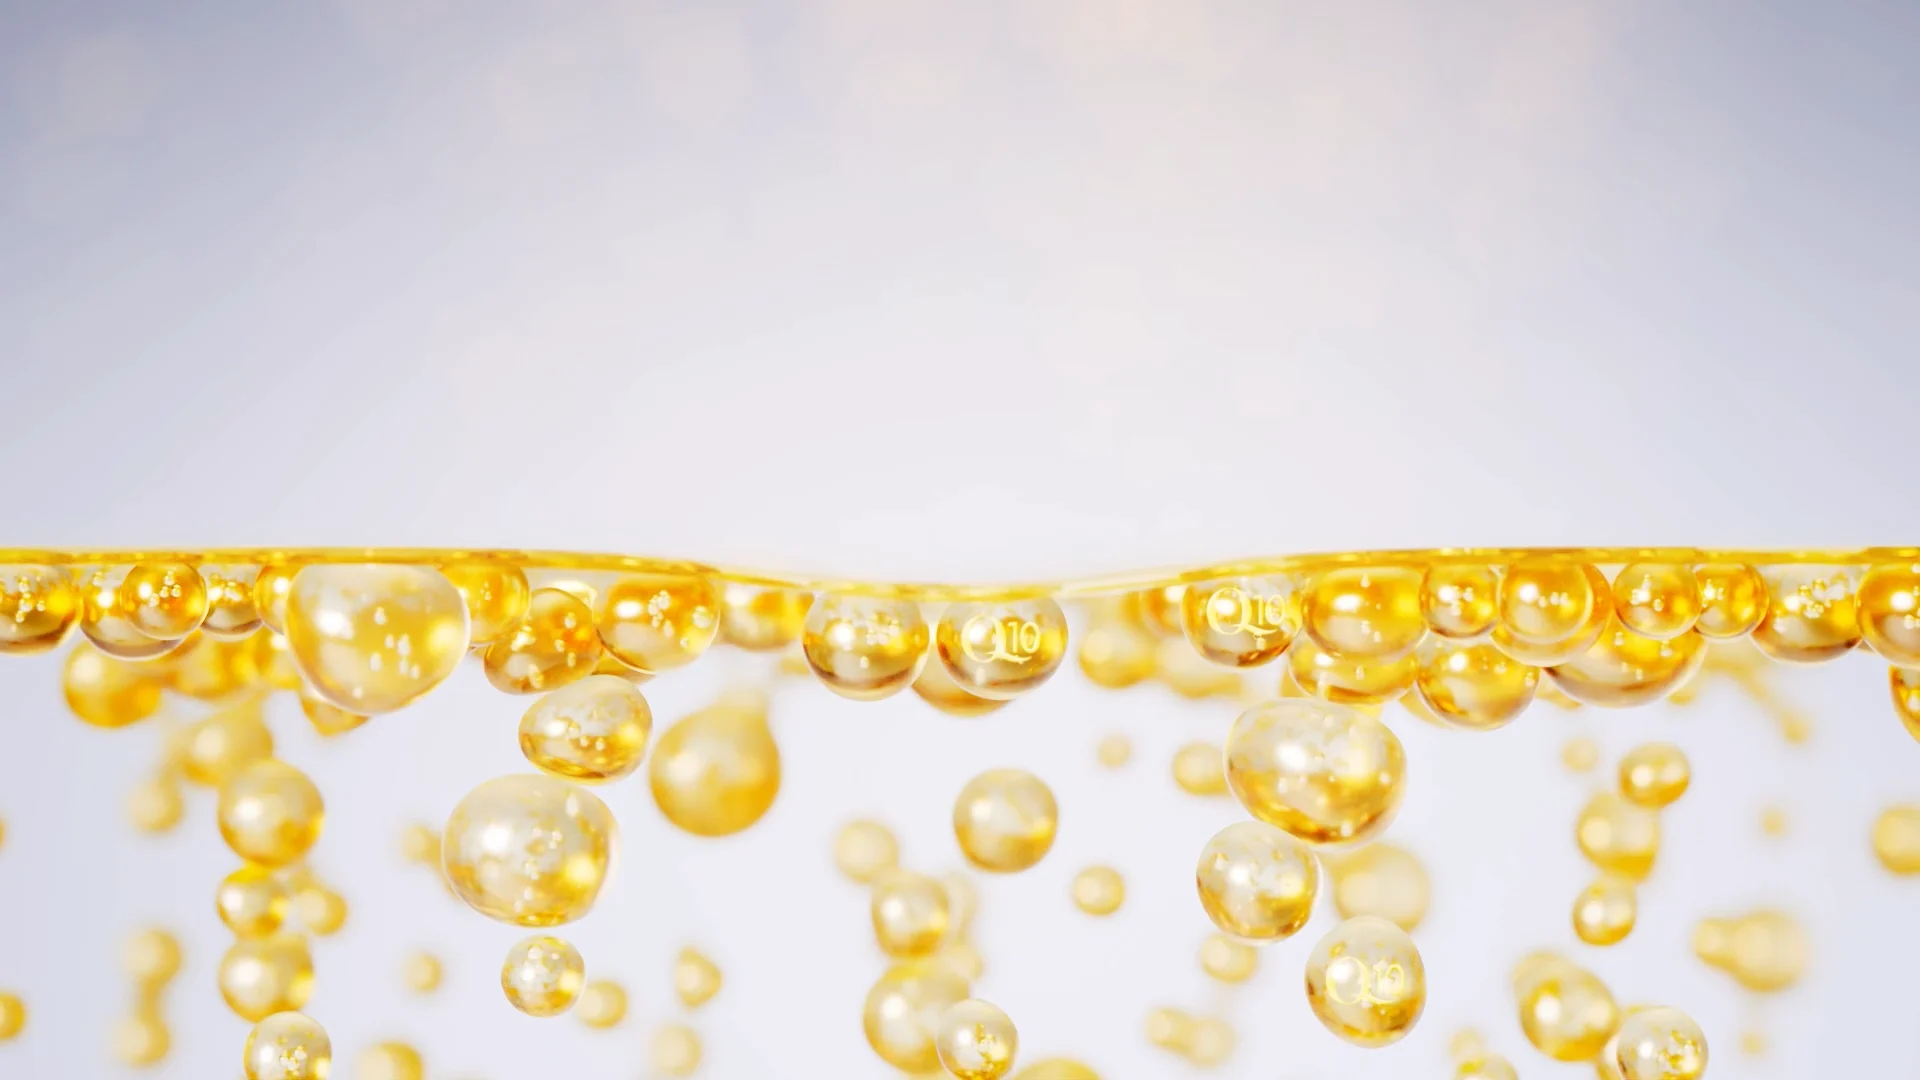 several golden bubbles with littel Q10 letters on it swimming in a transparent liquid